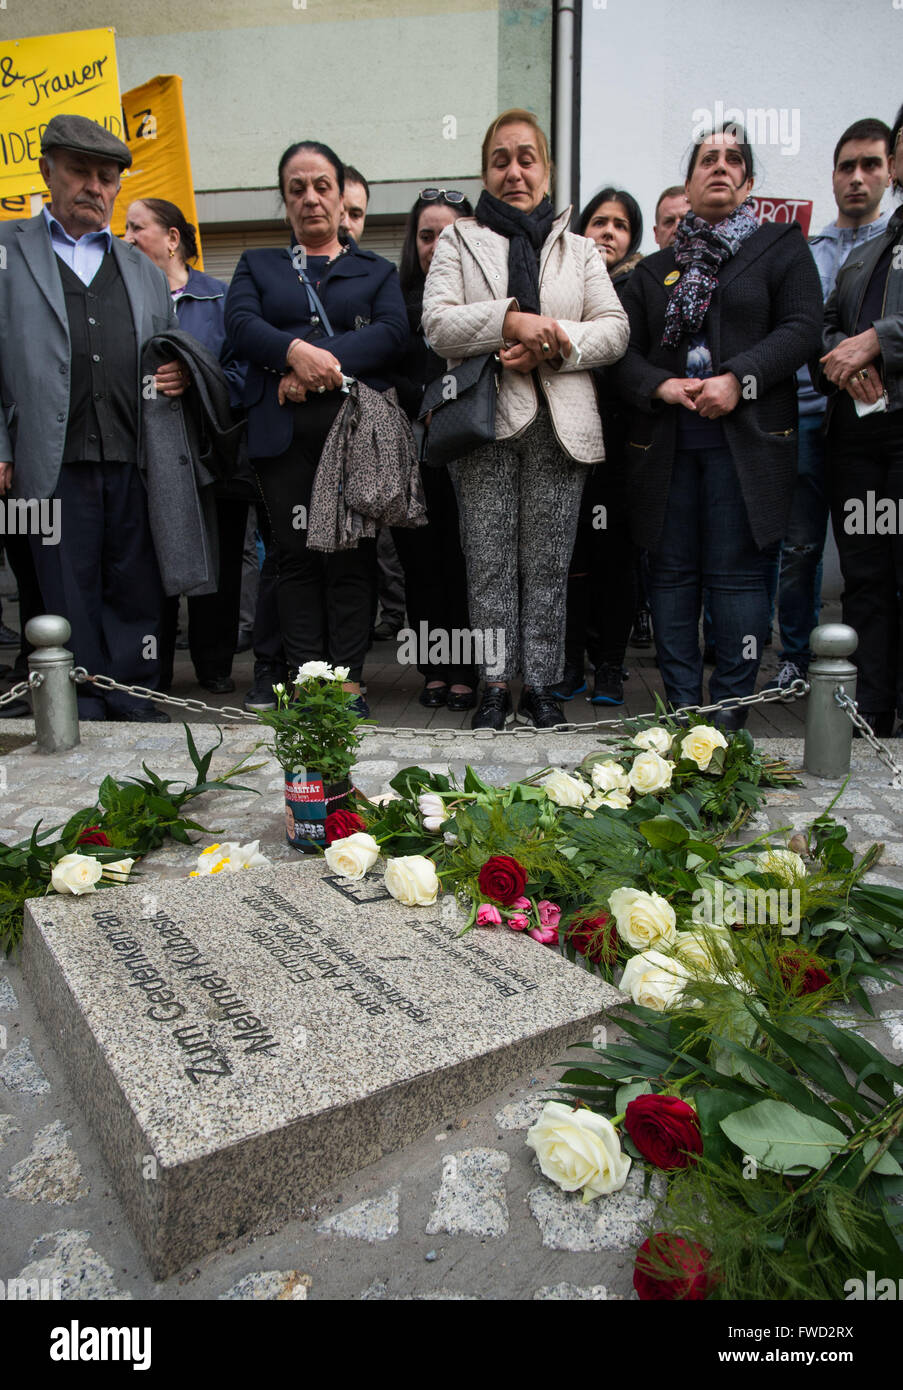 Dortmund, Germany. 4th Apr, 2016. The widow Elif Kubasik (2nd l) as well as family members and representatives of the city of Dortmund commemorate the cinema owner Mehmet Kubasik, murdered by the NSU terror group, in Dortmund, Germany, 4 April 2016. 10 years ago, Kubasik became the eighth victim of the Neonazi terror group. PHOTO: BERND THISSEN/dpa/Alamy Live News Stock Photo